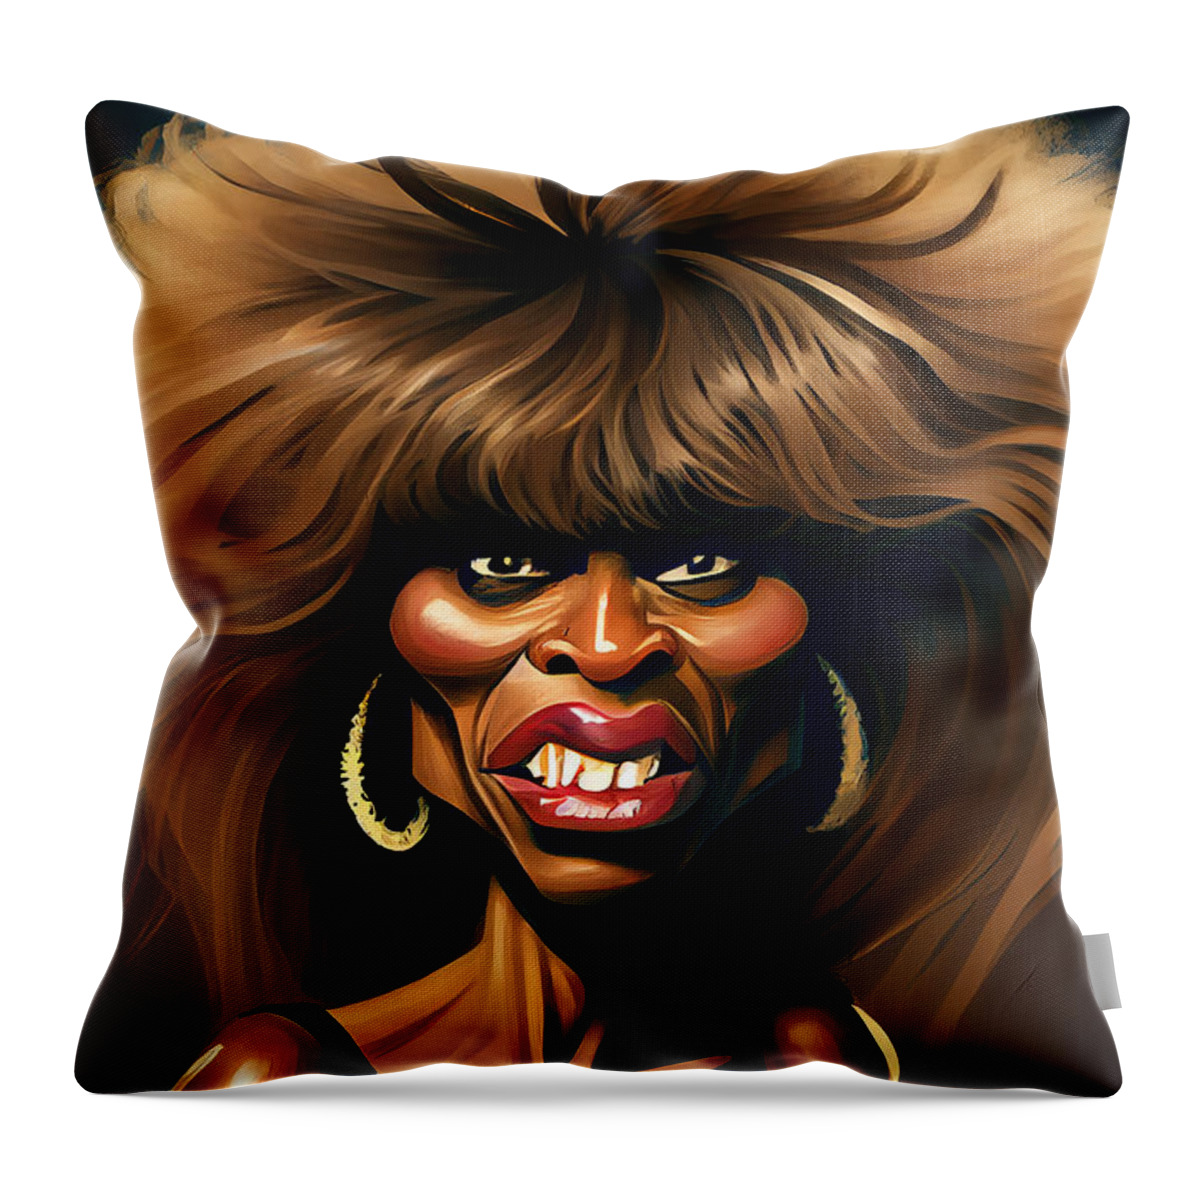 Tina Turner Throw Pillow featuring the mixed media Tina Turner Caricature #1 by Stephen Smith Galleries